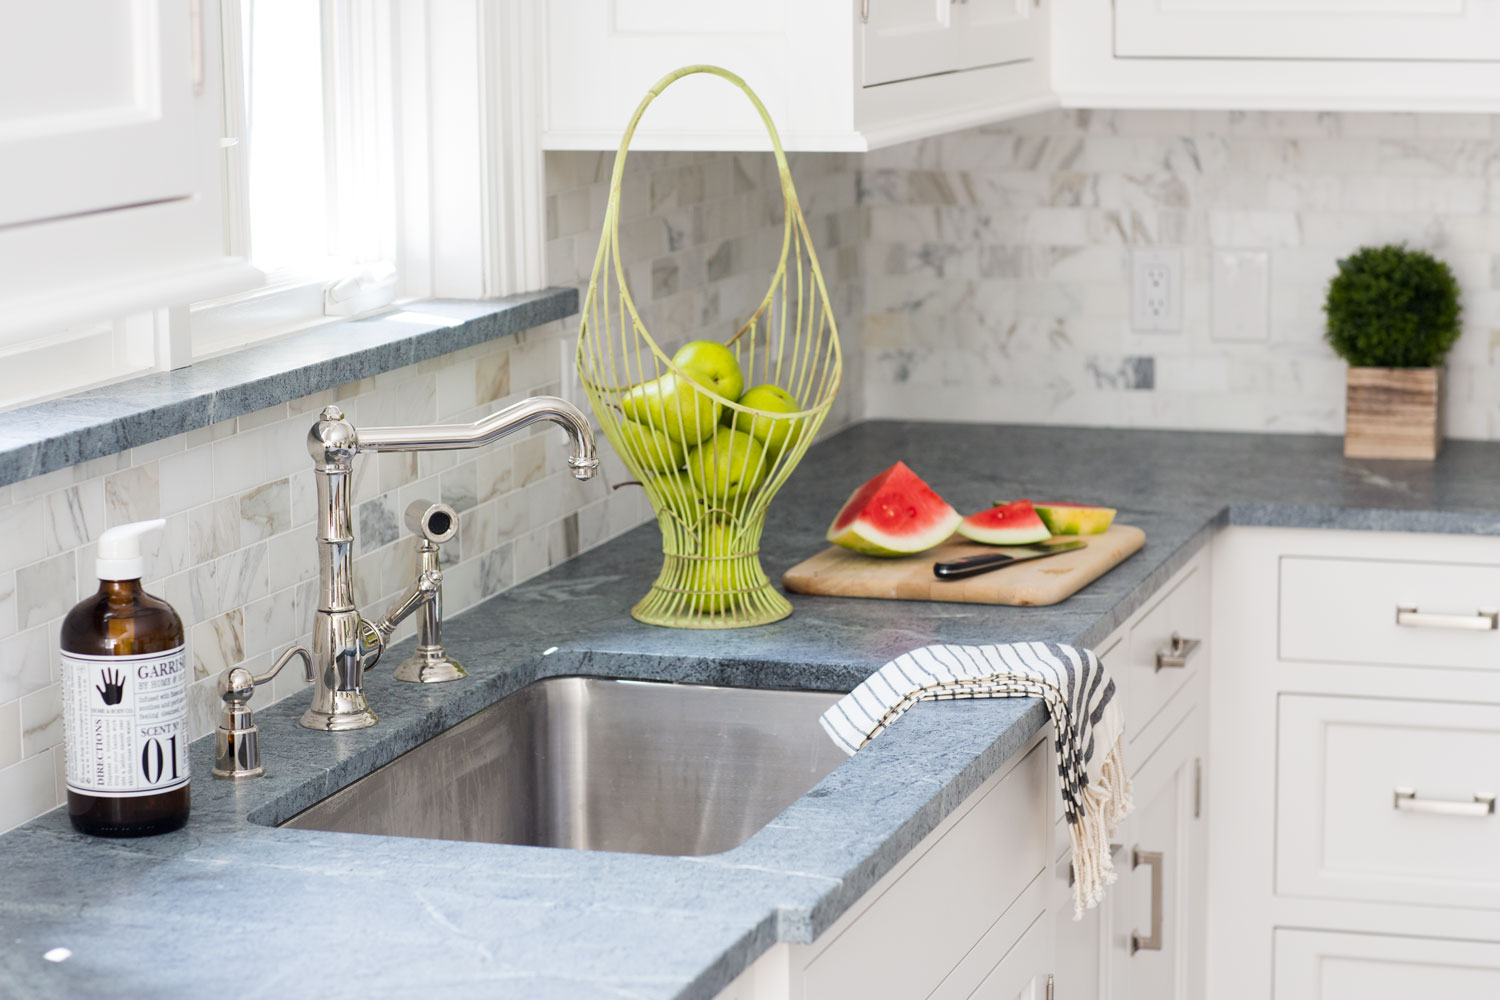 Soapstone Countertop: What to Know Before You Buy